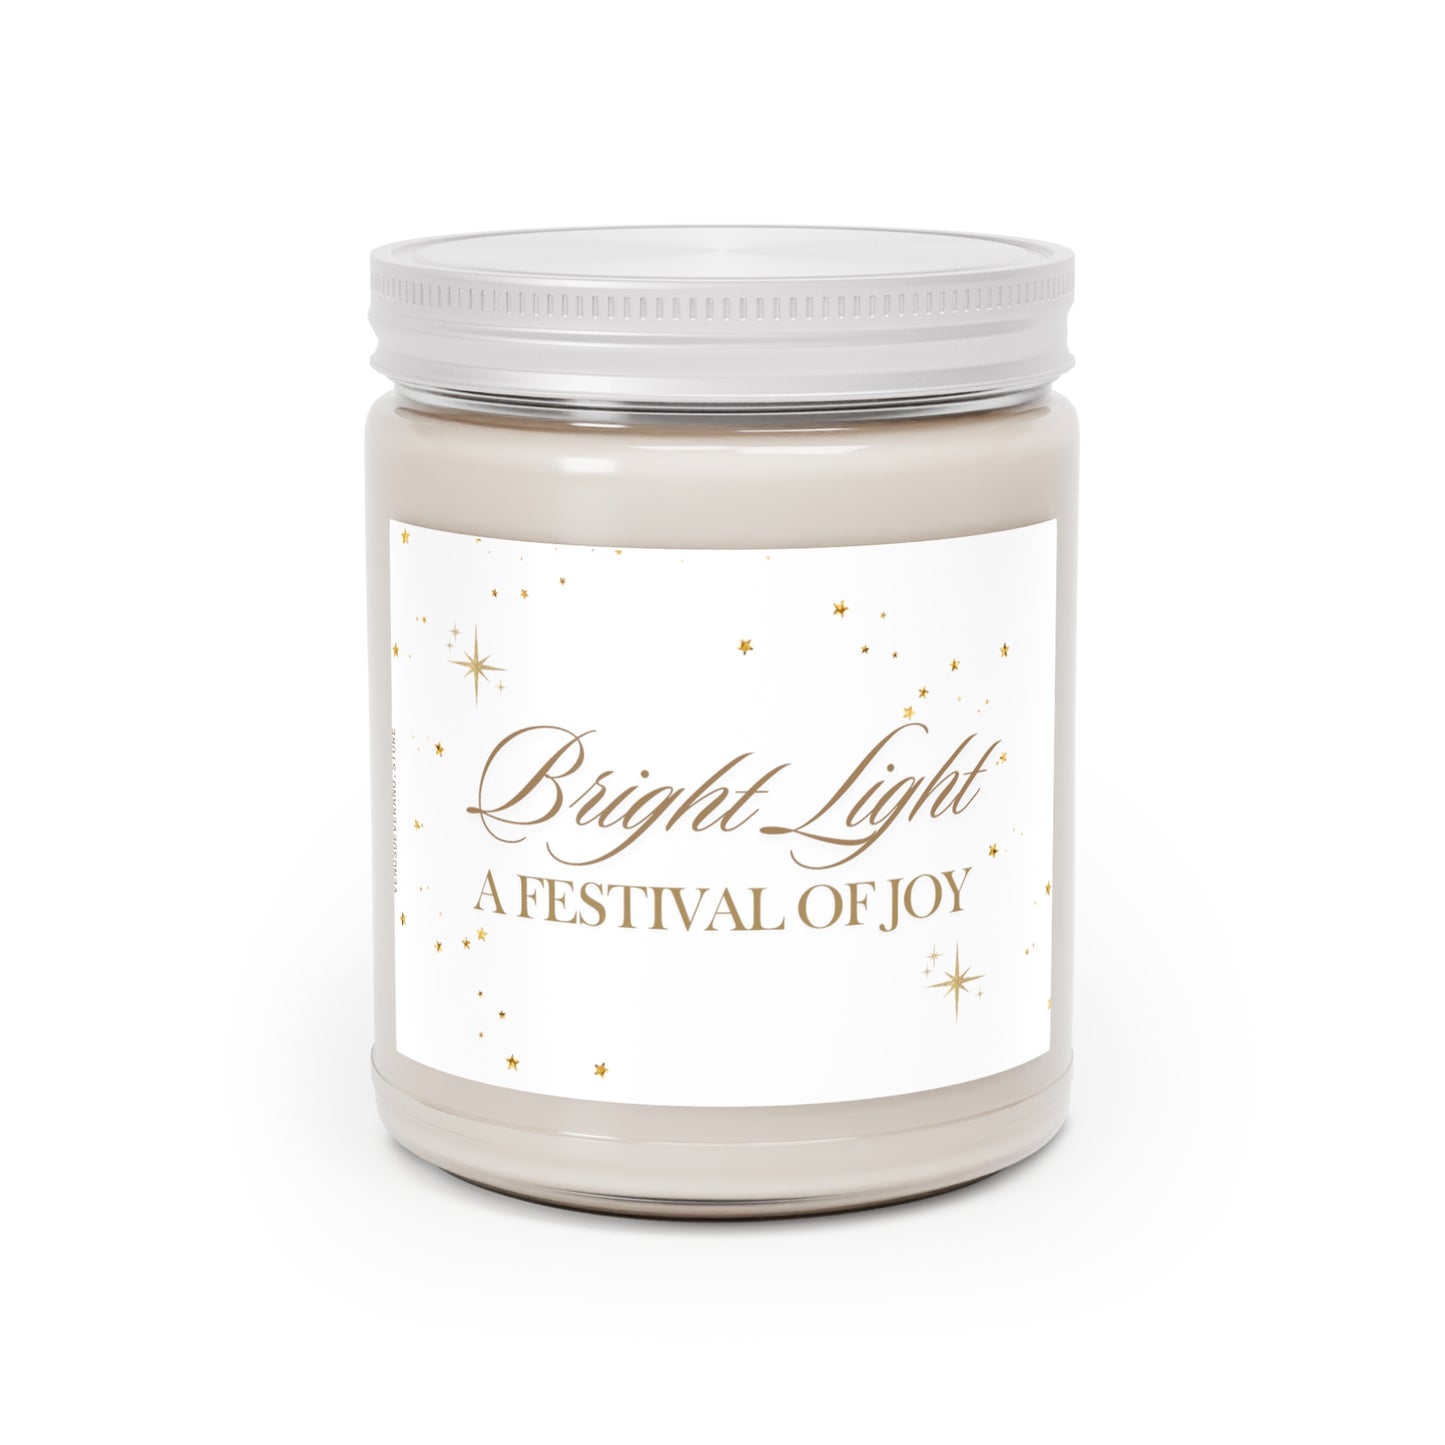 Scented Candles, 9oz - Bright light, a festival of JOY- Made 100% natural soy wax blend and cotton wick - Vanilla Bean, Comfort Spice and Sea Breeze fragrances available.